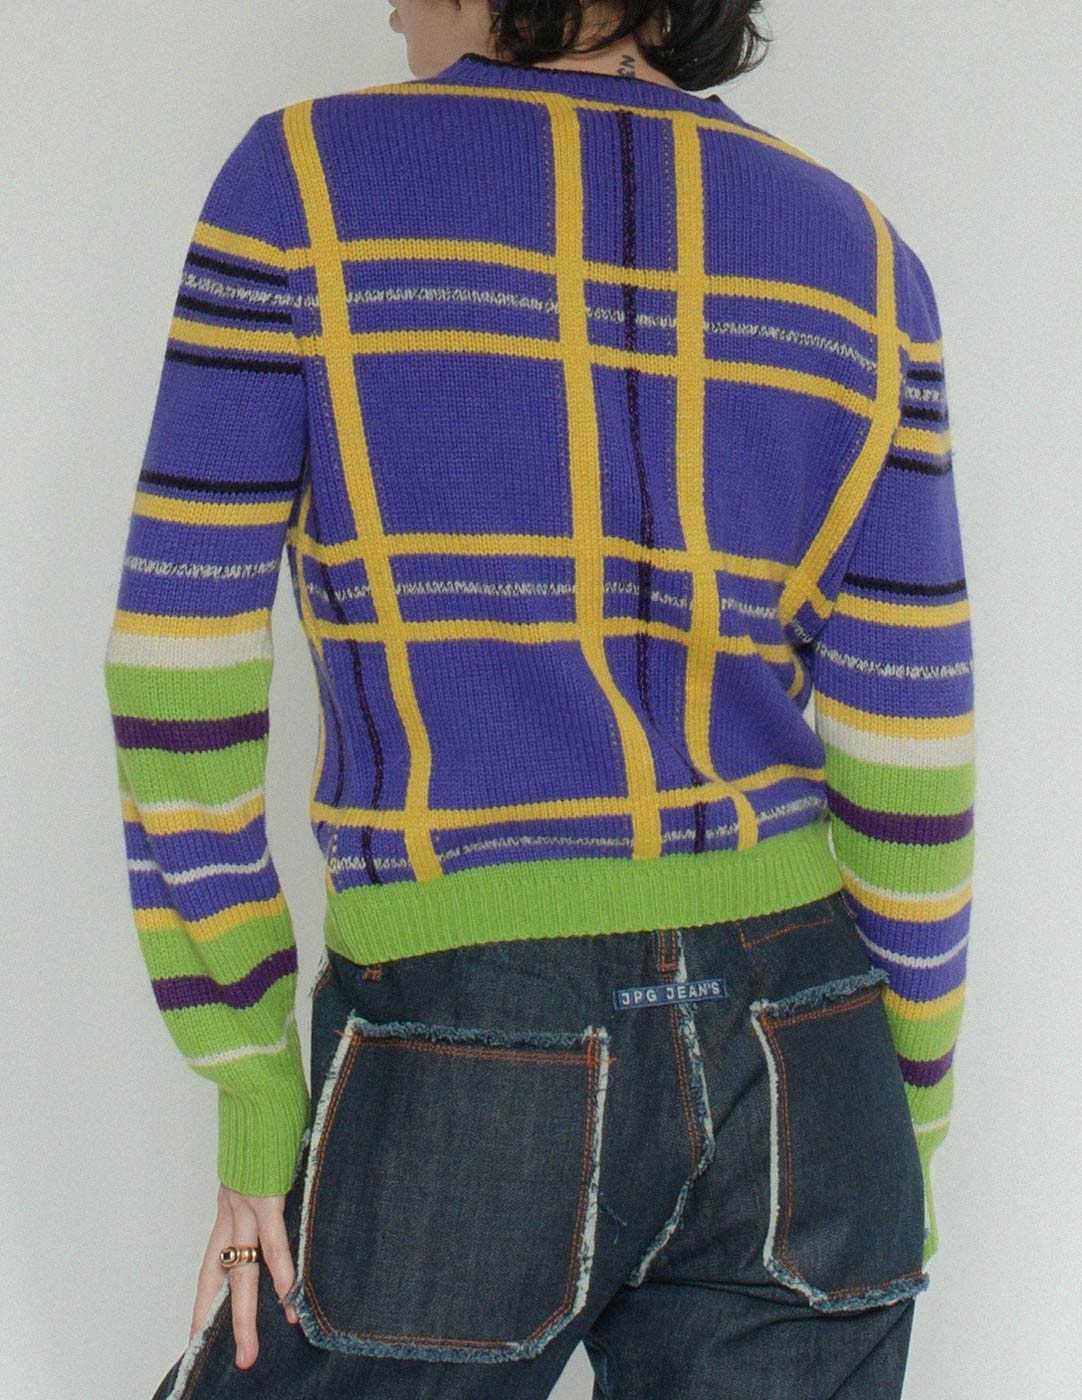 Gianni Versace vintage multi-colored plaid sweater back detail